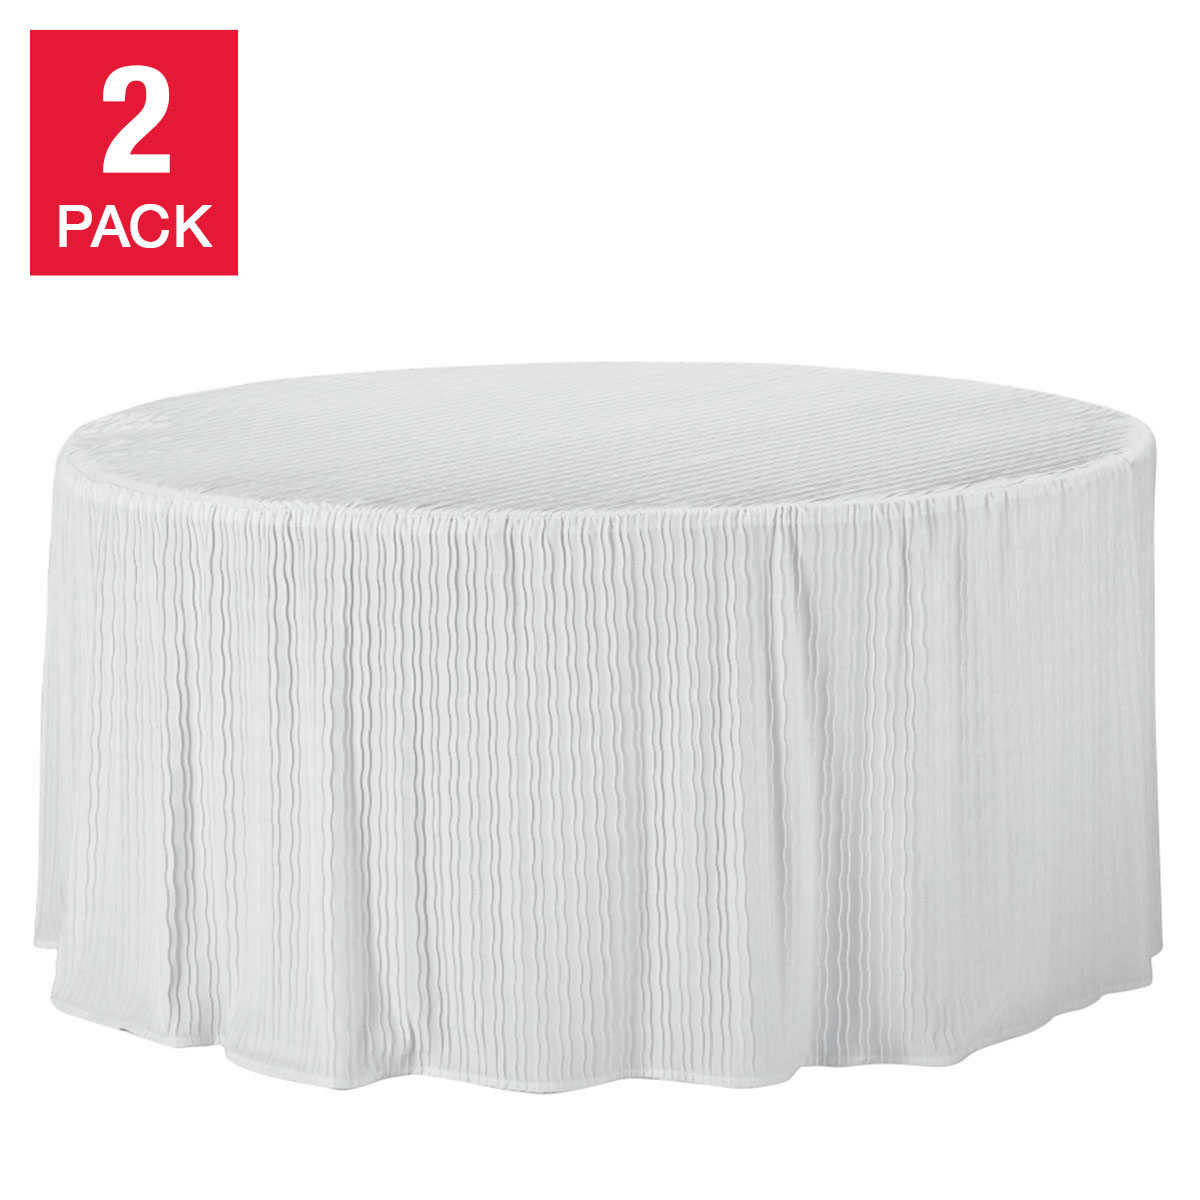 60 Round Table Cloth 2 Pack Costco, How Many Chairs Fit Around A 32 Round Tablecloth